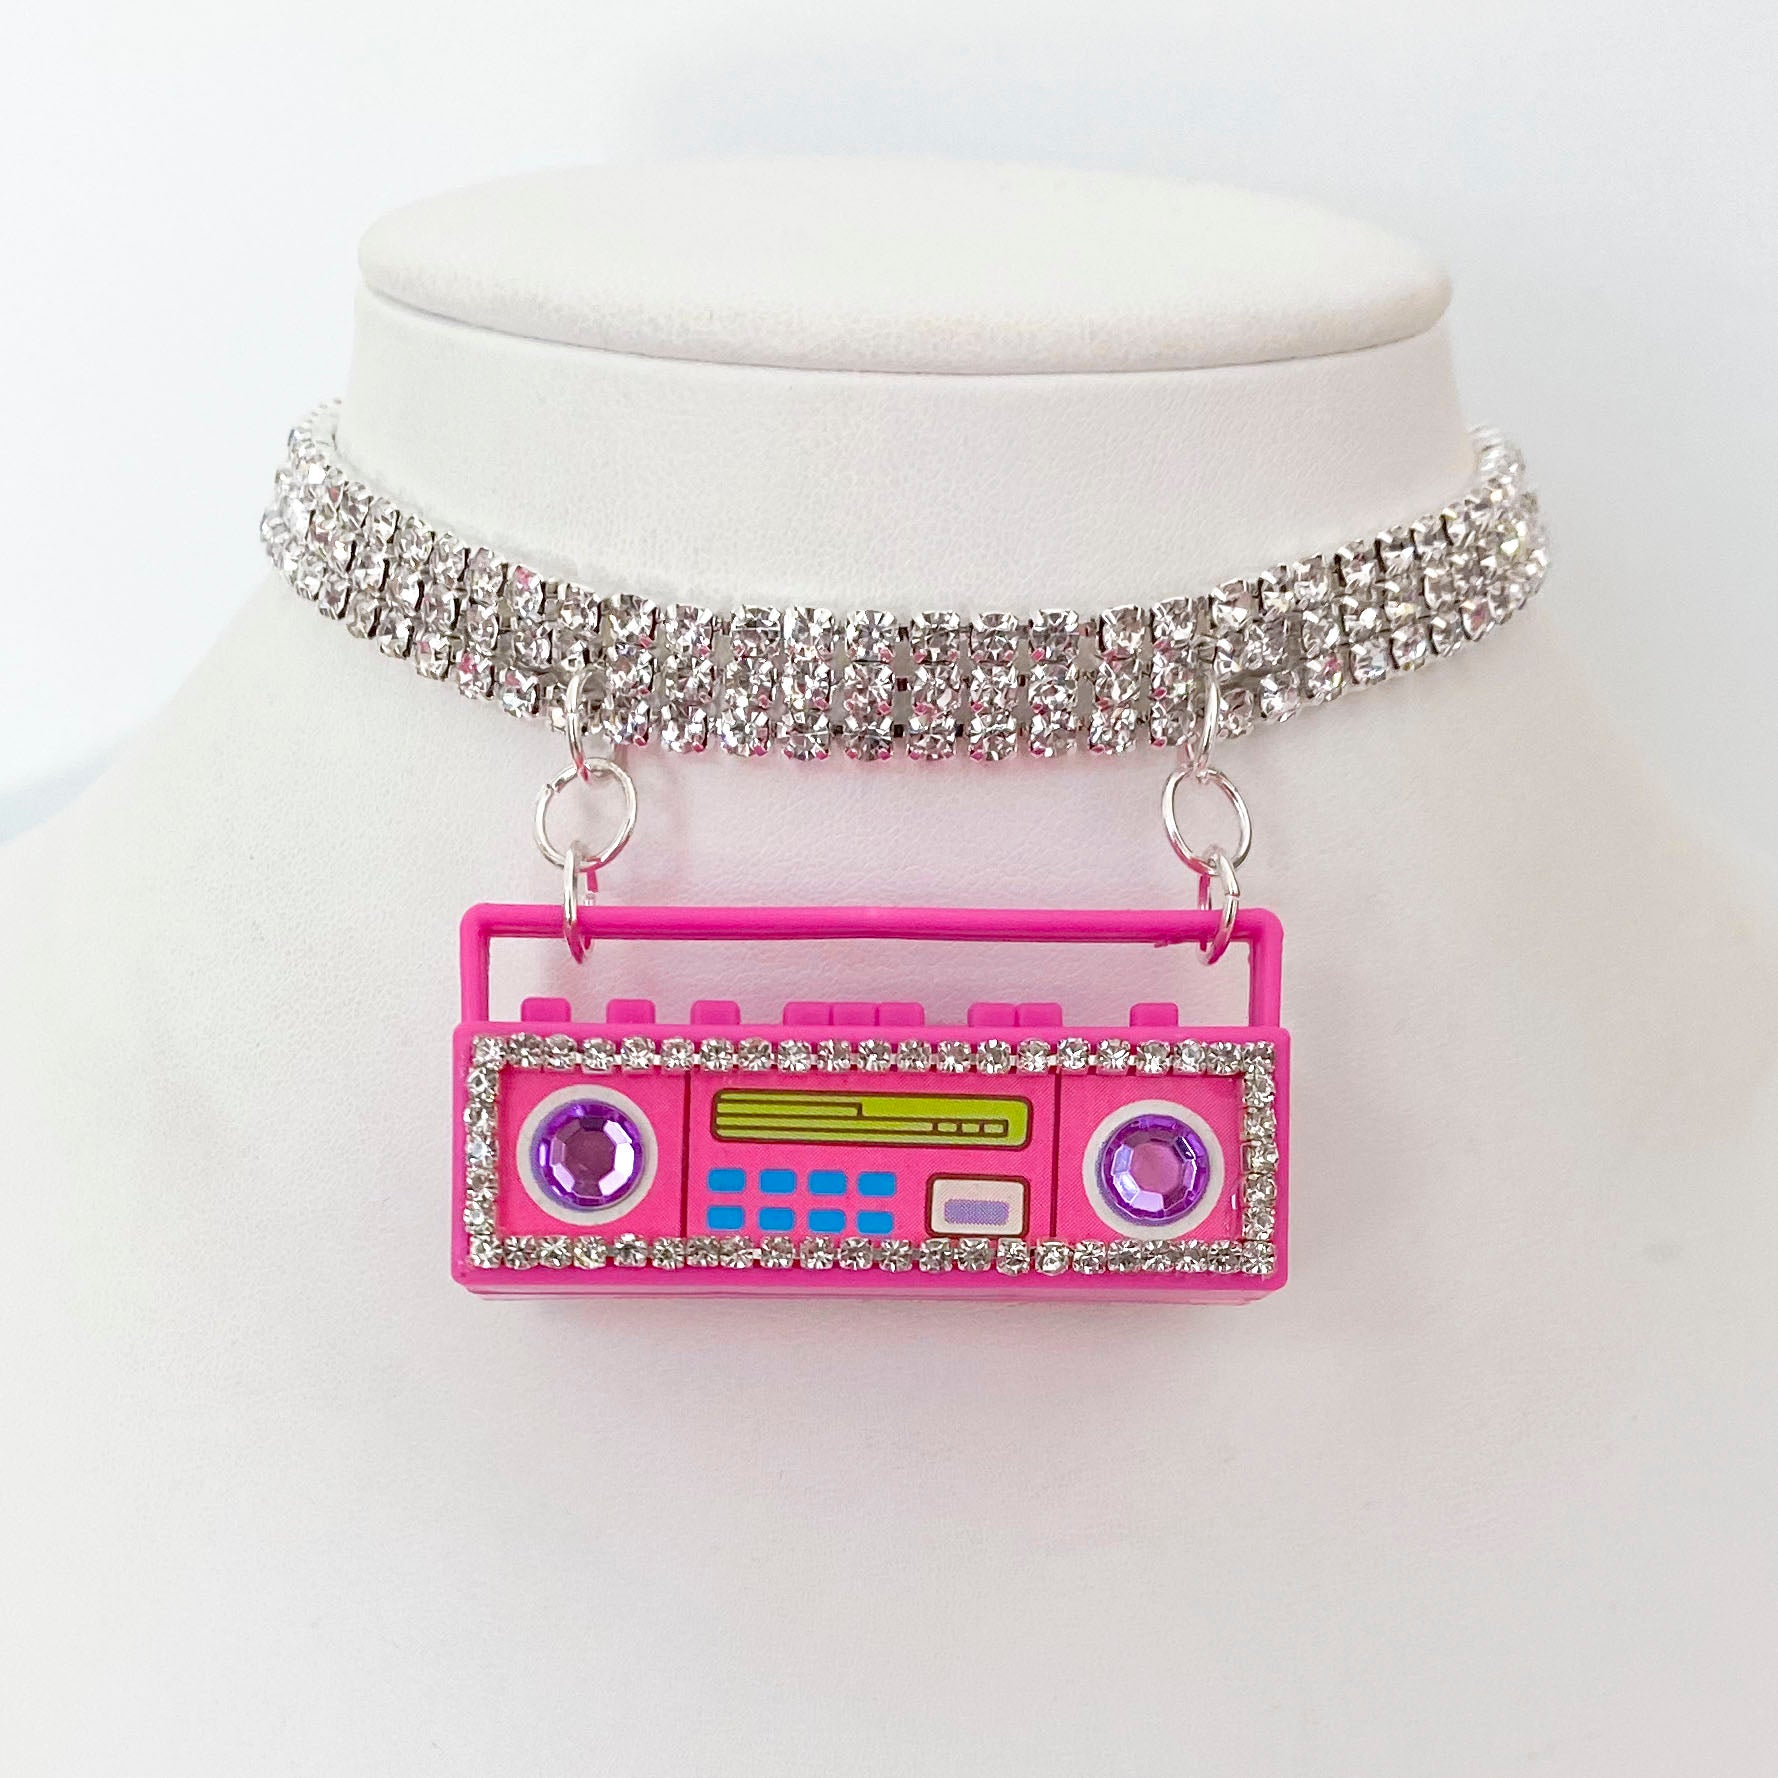 Barbie Pink Boombox Necklace